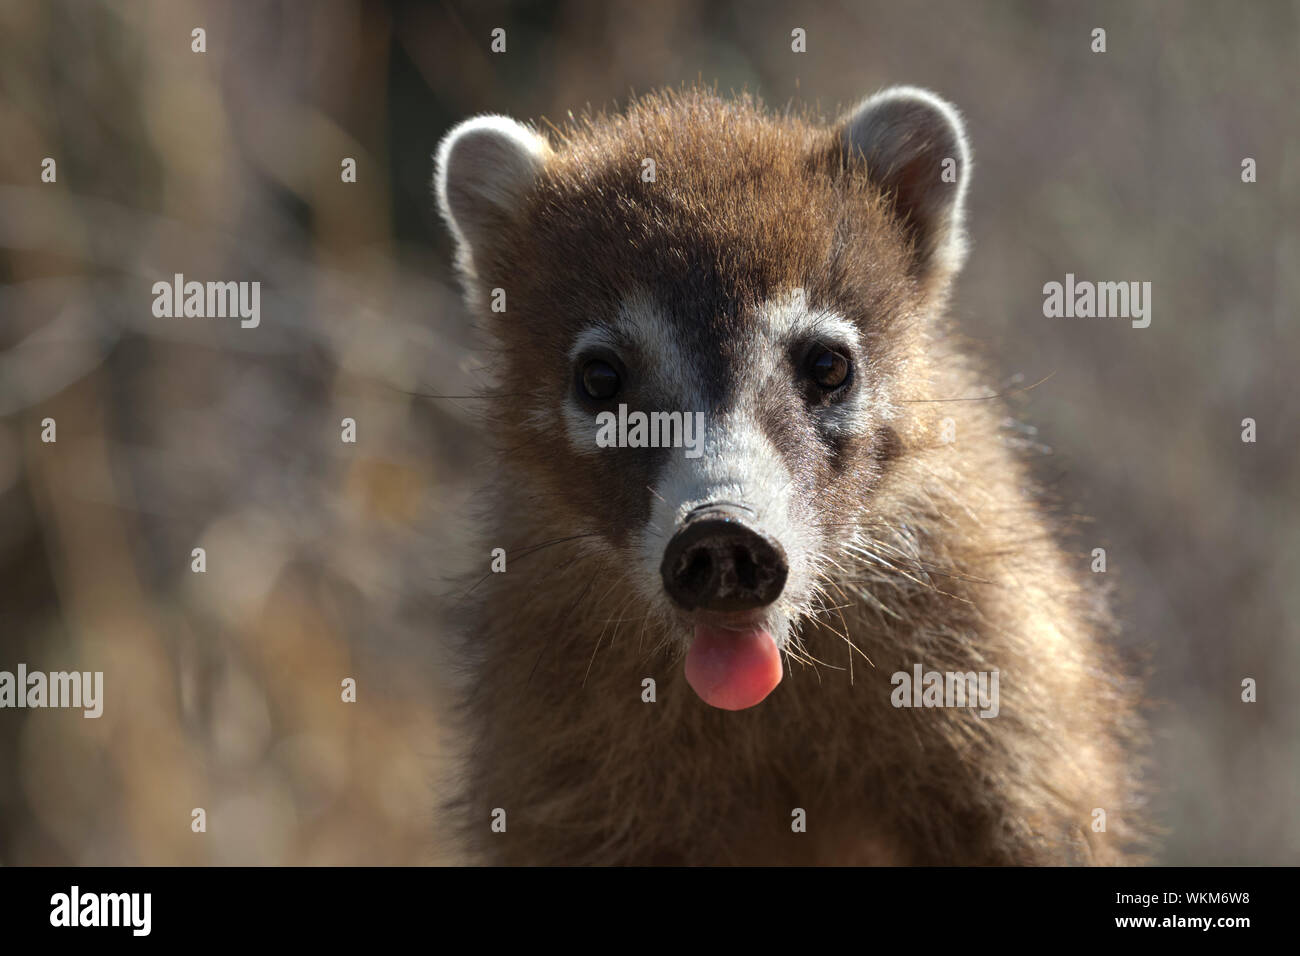 Wild, distinctive coatimundi has tongue out on hot, summer day in Sonorana desert.  Distinctive  coati, is found in Arizona and down into South Americ Stock Photo